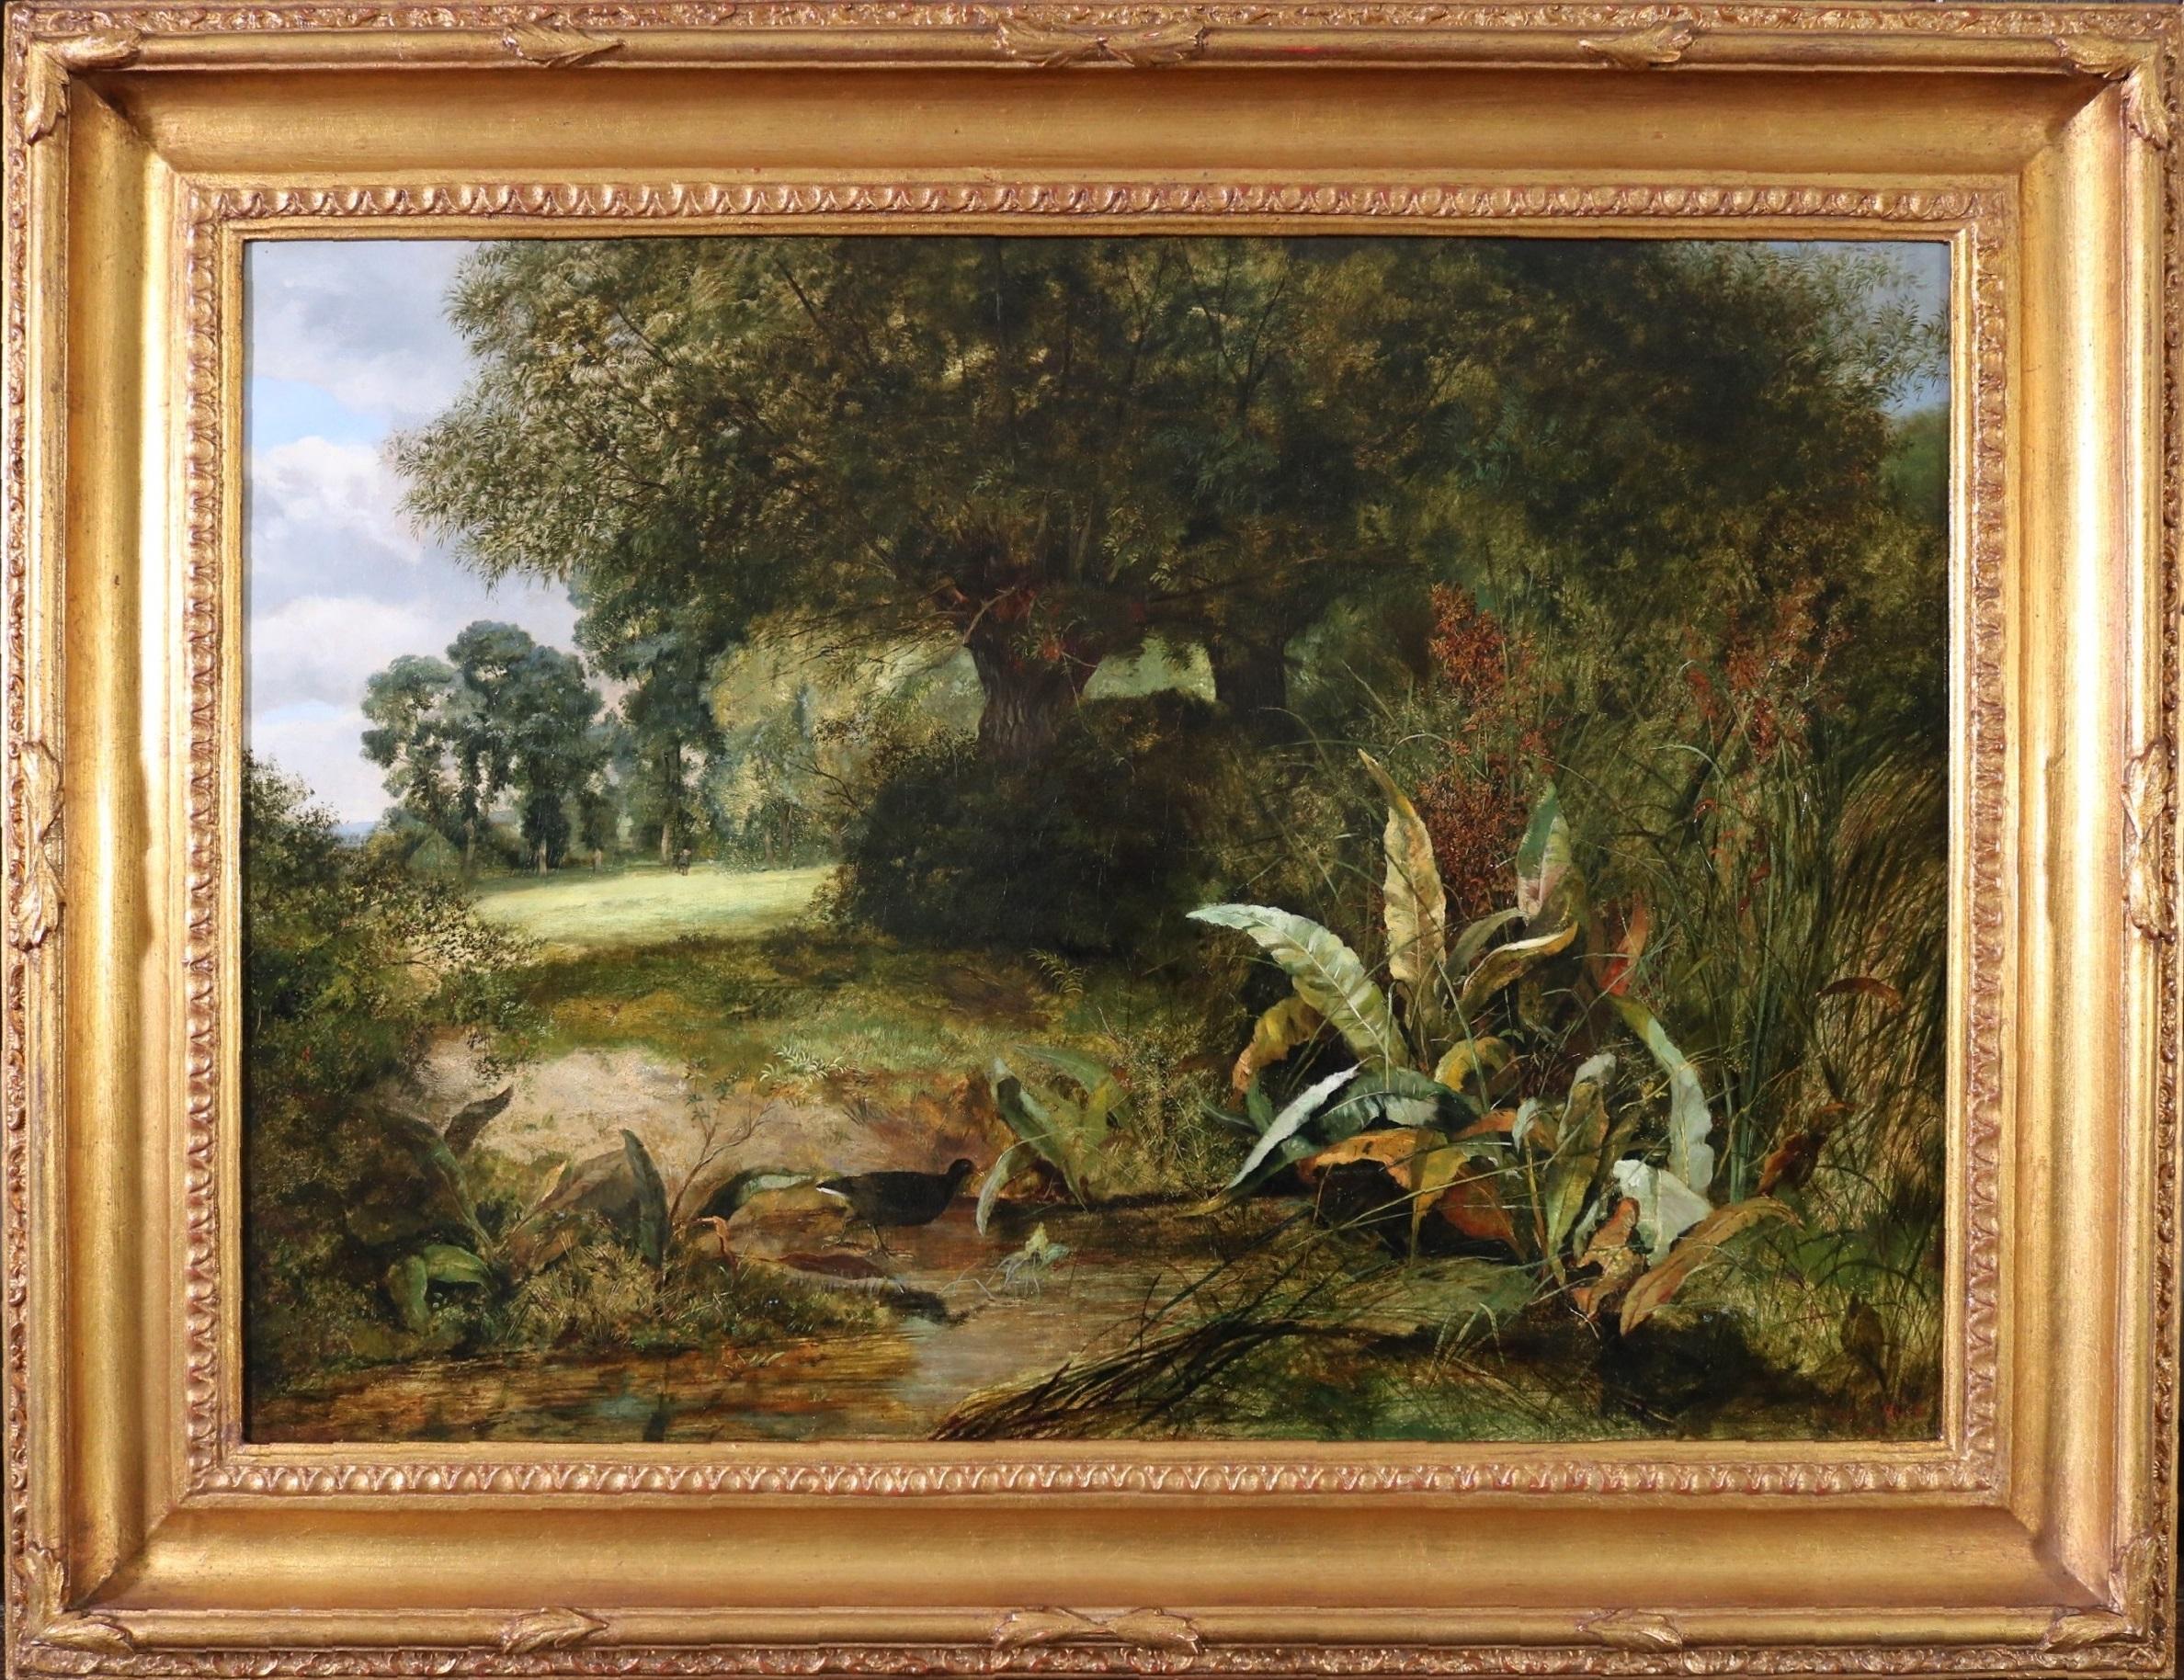 ‘A Quiet Nook’ by Arthur James Stark (1831-1902). The painting – which depicts a moorcock wading in the shallows of a stream in an English woodland landscape – is signed by the artist and was exhibited at the Royal Academy in London in 1857. It was